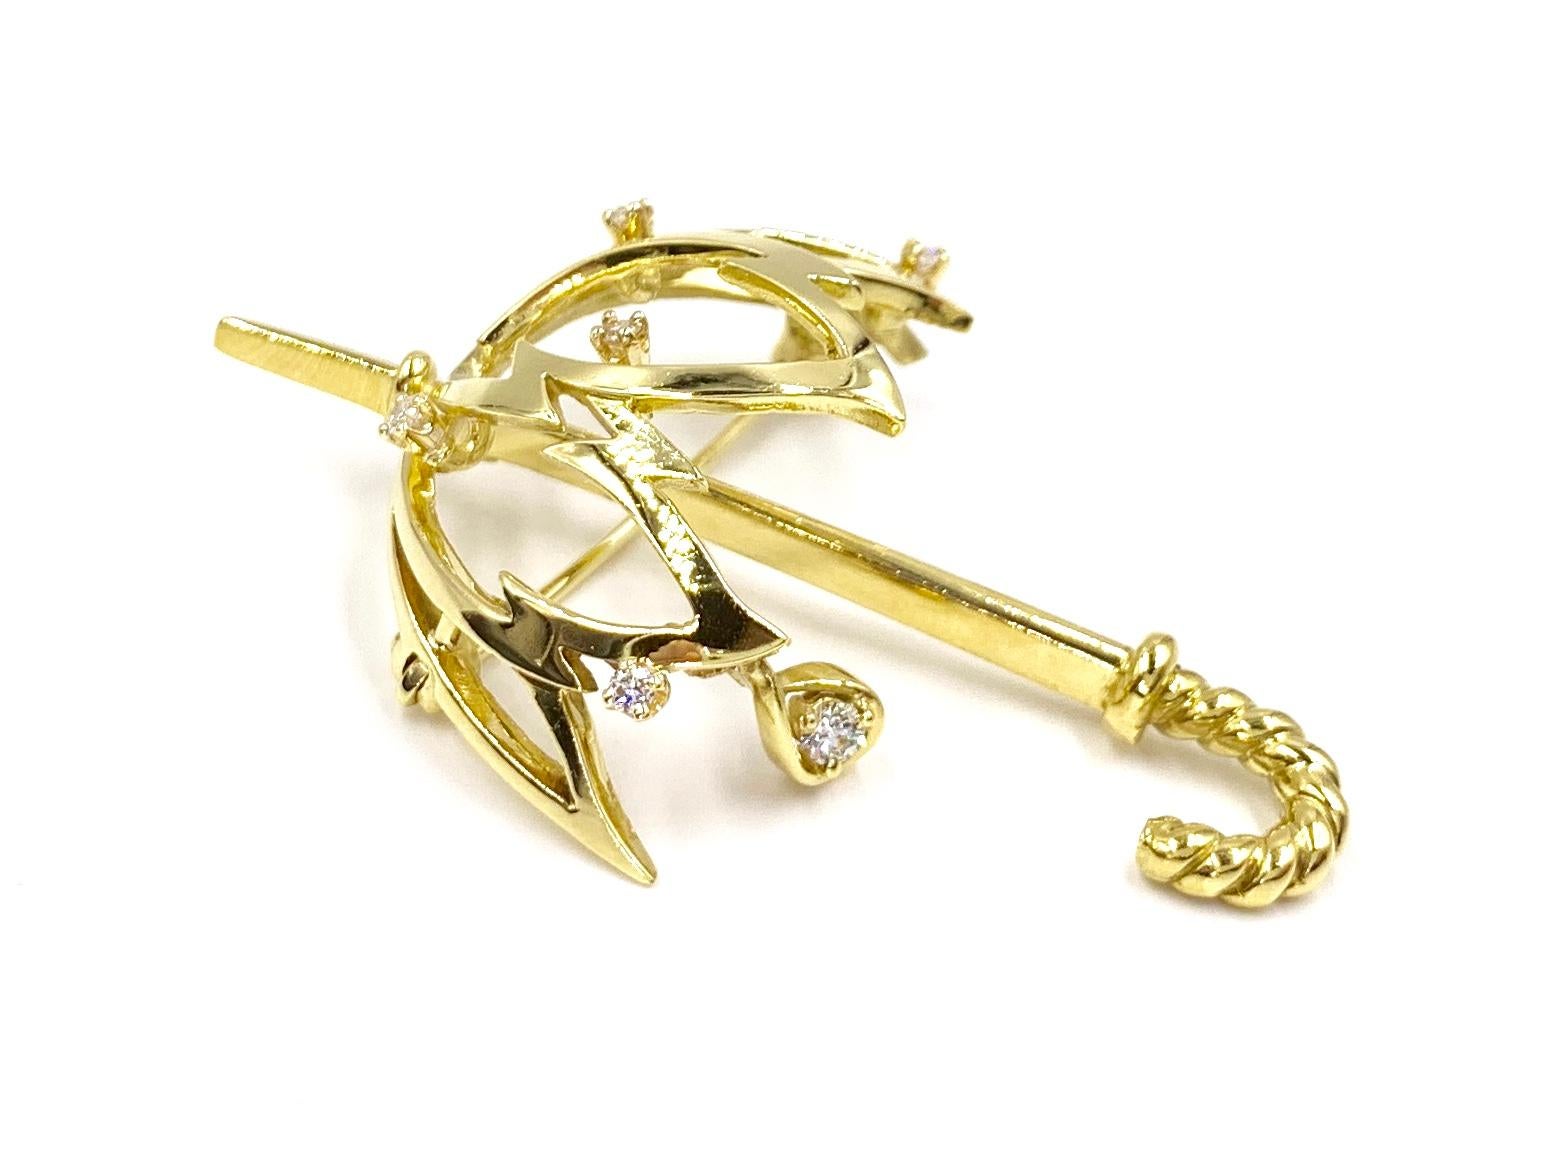 Created in 1974, this unique vintage polished 18 karat yellow gold umbrella brooch is whimsical and beautiful. Brooch features 6 round brilliant diamonds, including one dangling from a rain drop, with approximately .22 carats total weight. Diamonds